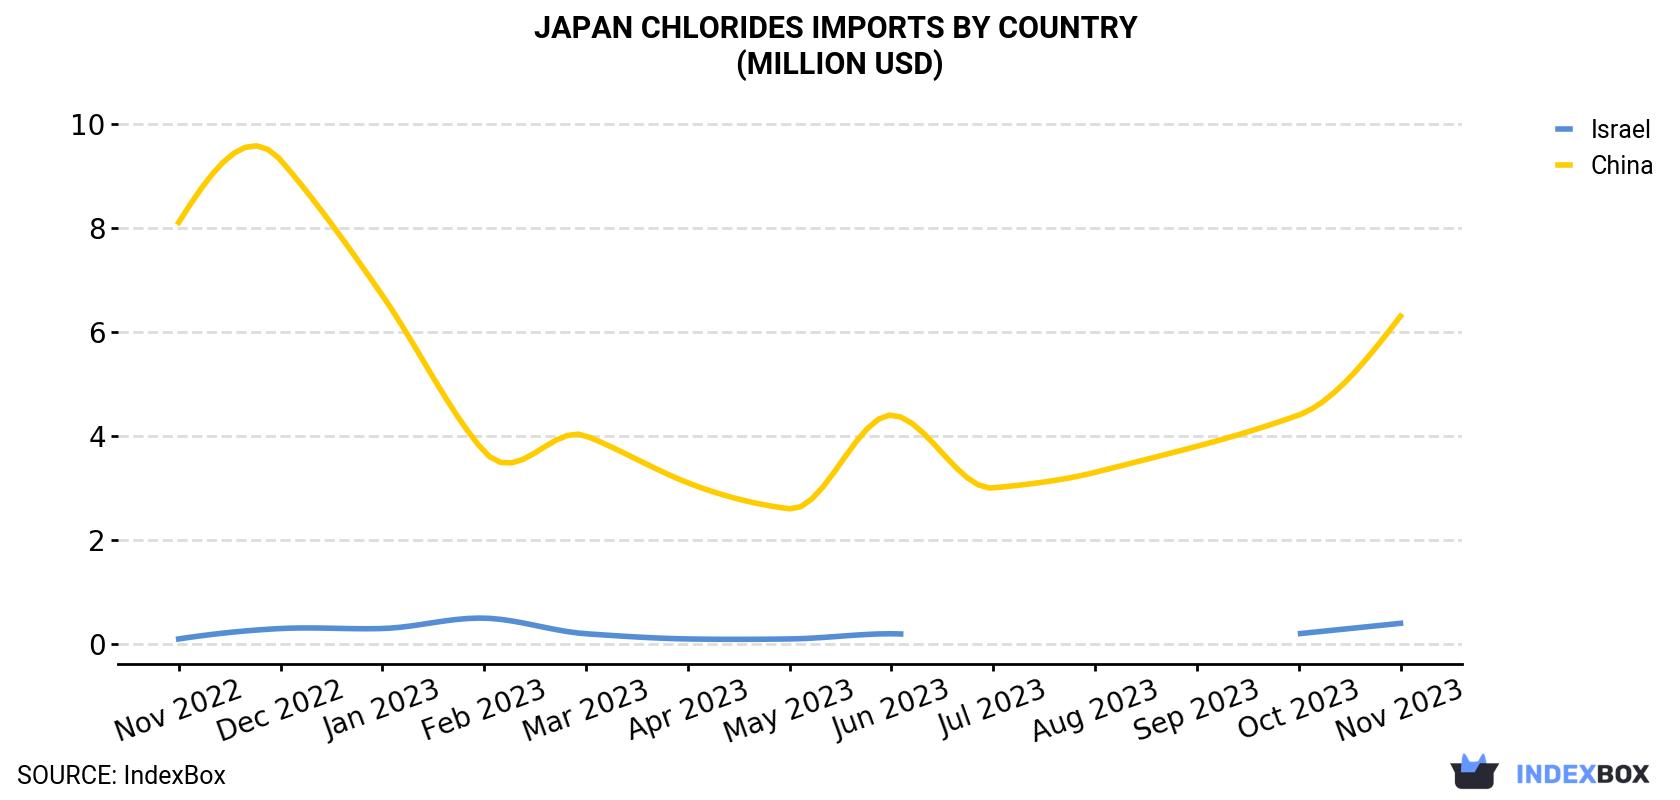 Japan Chlorides Imports By Country (Million USD)